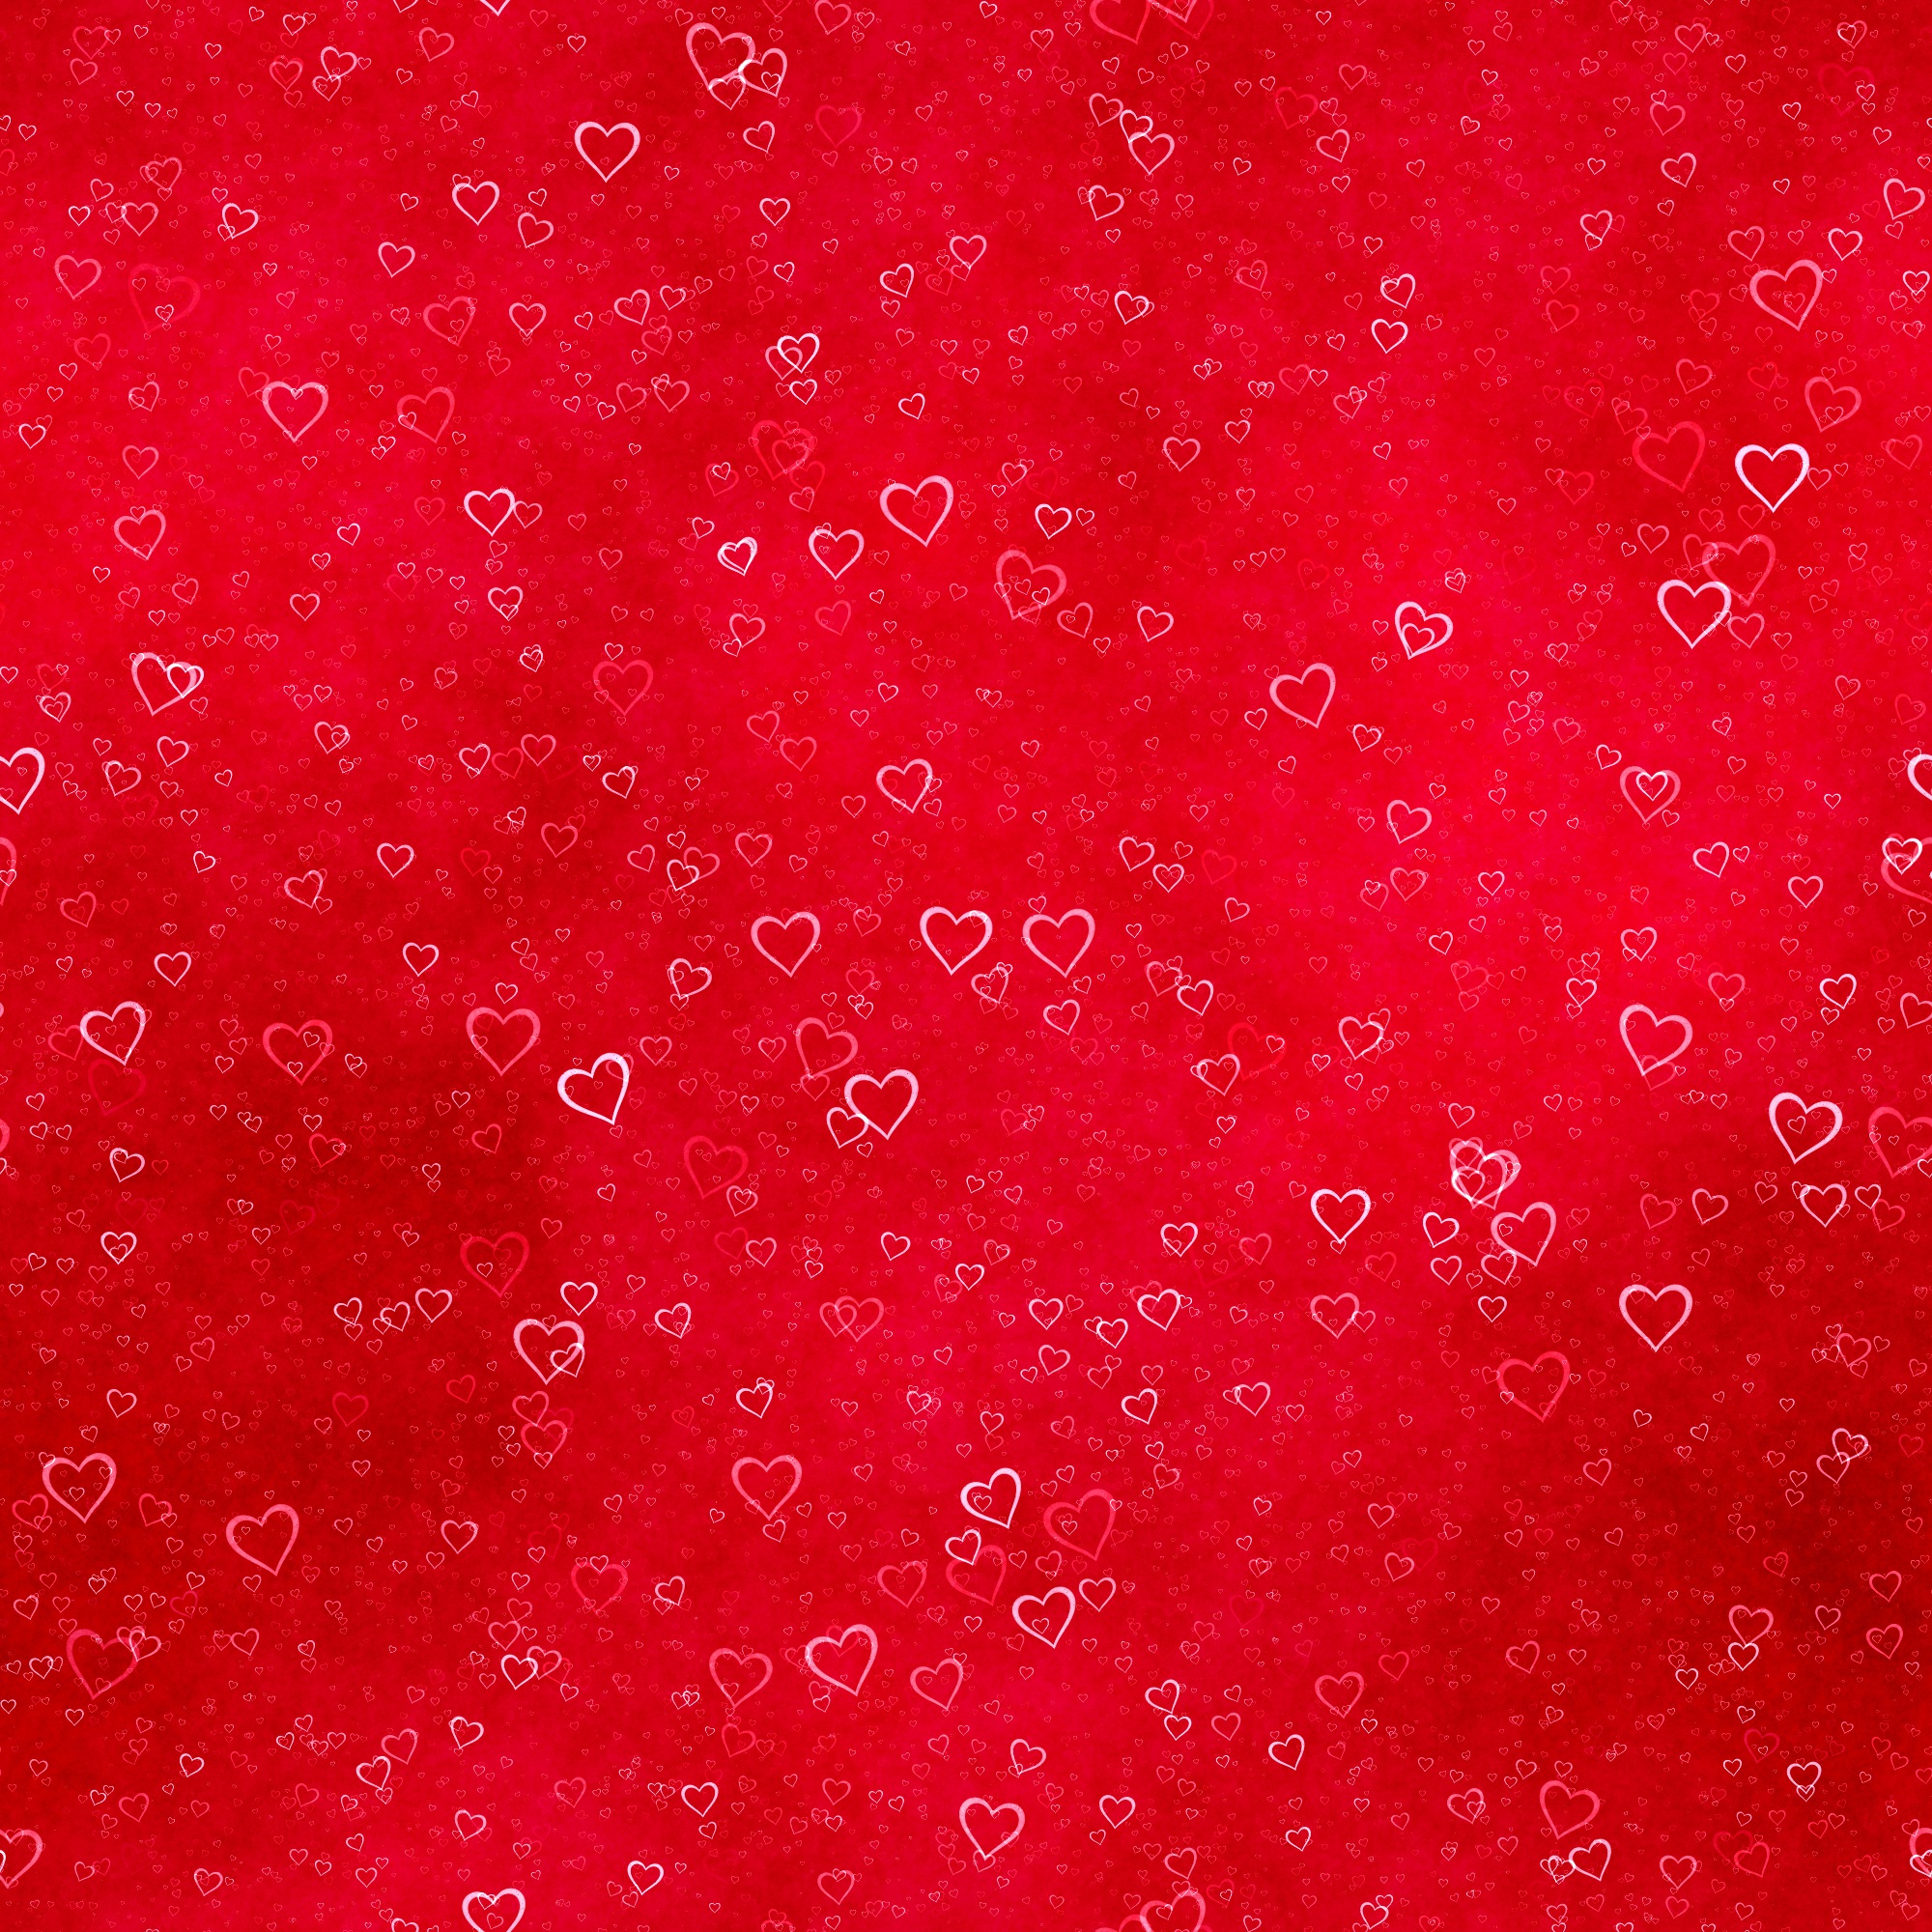 hearts, love, red, texture 1080p